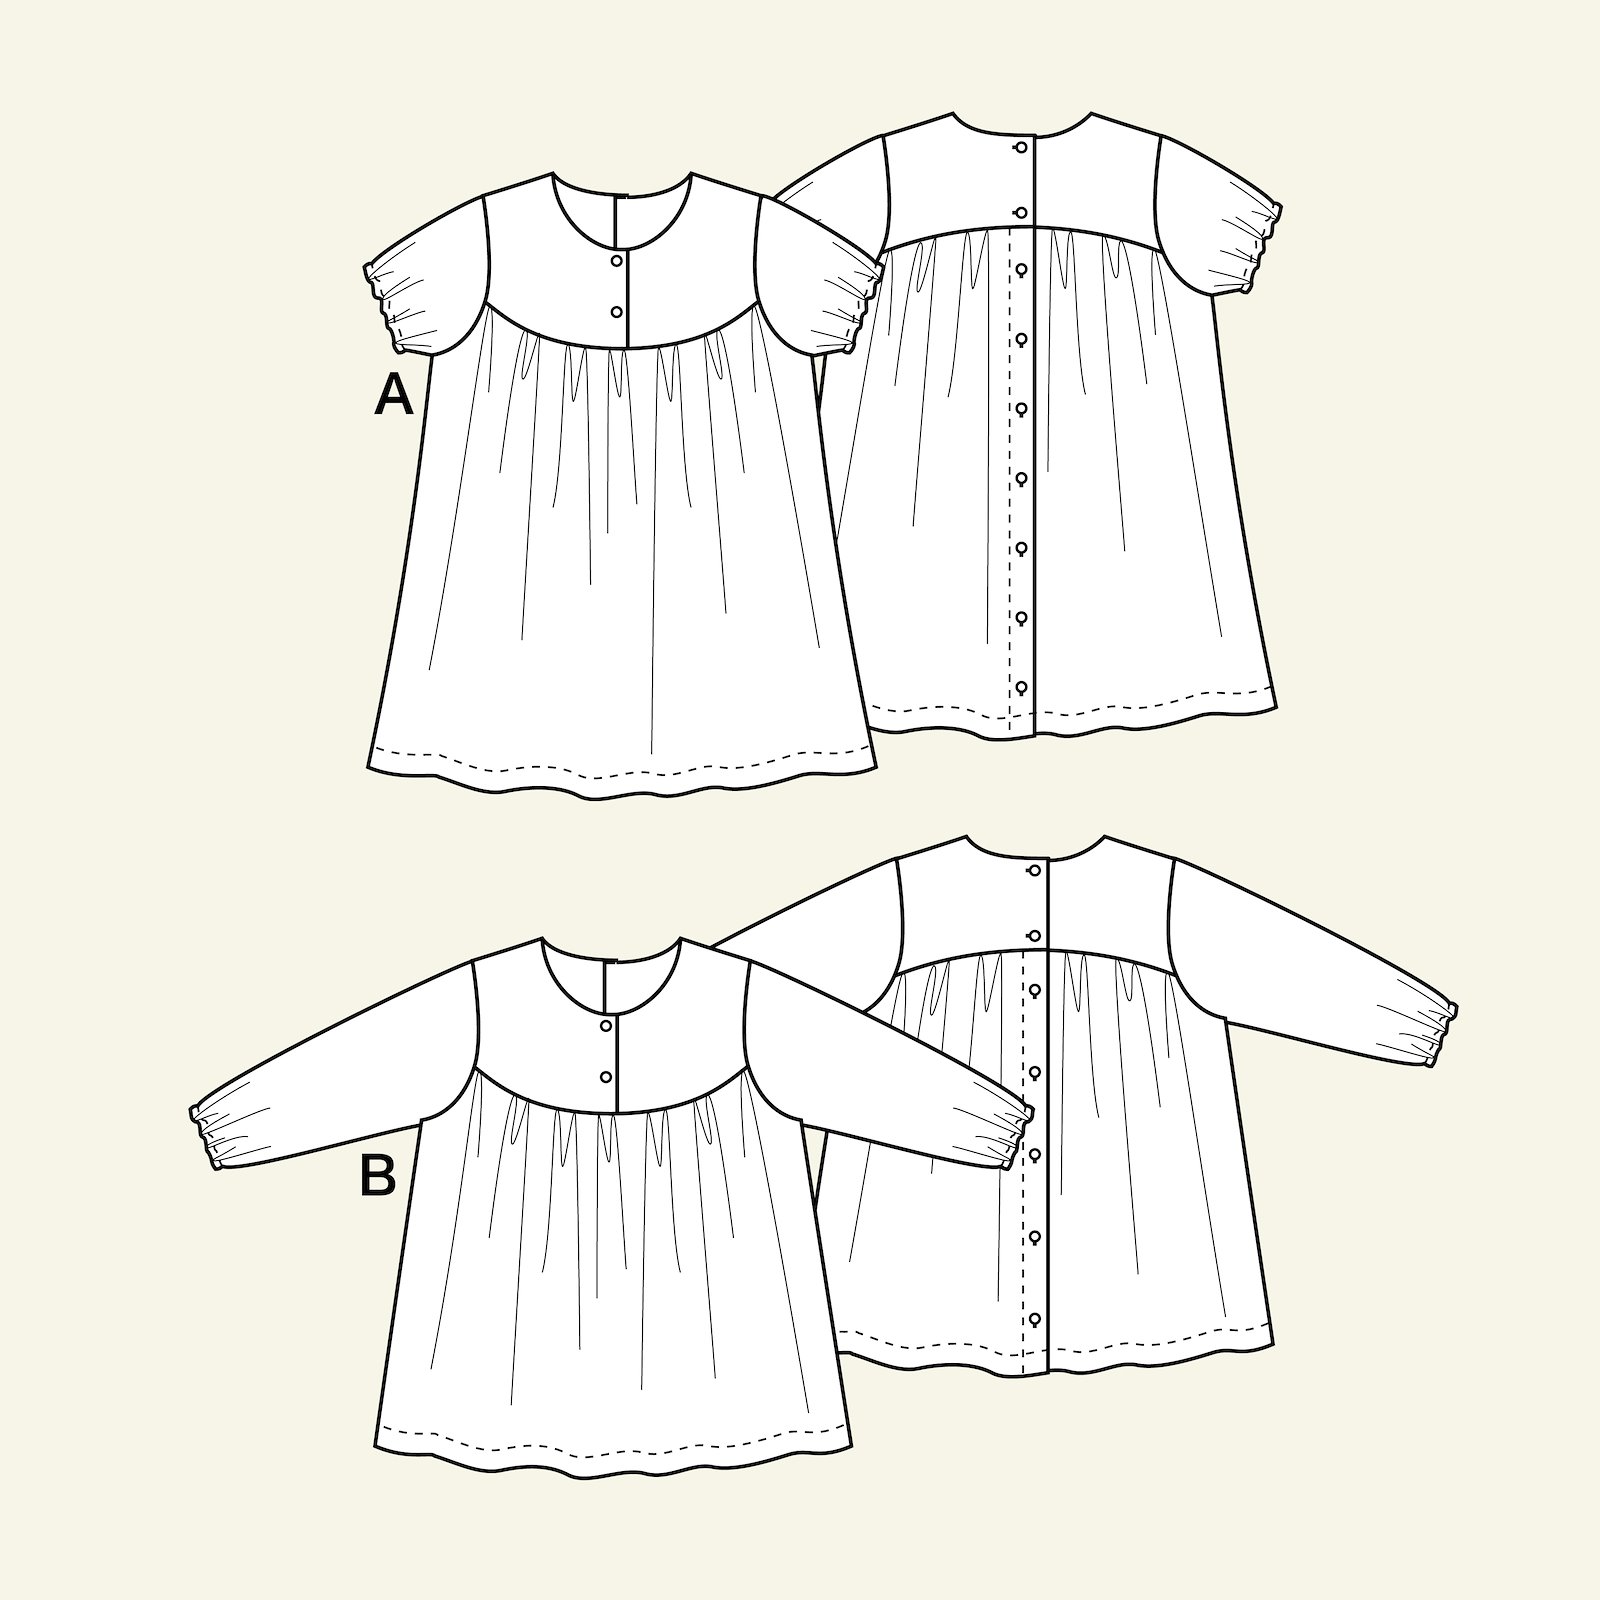 Dress and blouse with yoke and ga, 74/9m p83011000_p83011001_p83011002_p83011003_p83011004_pack_b.png